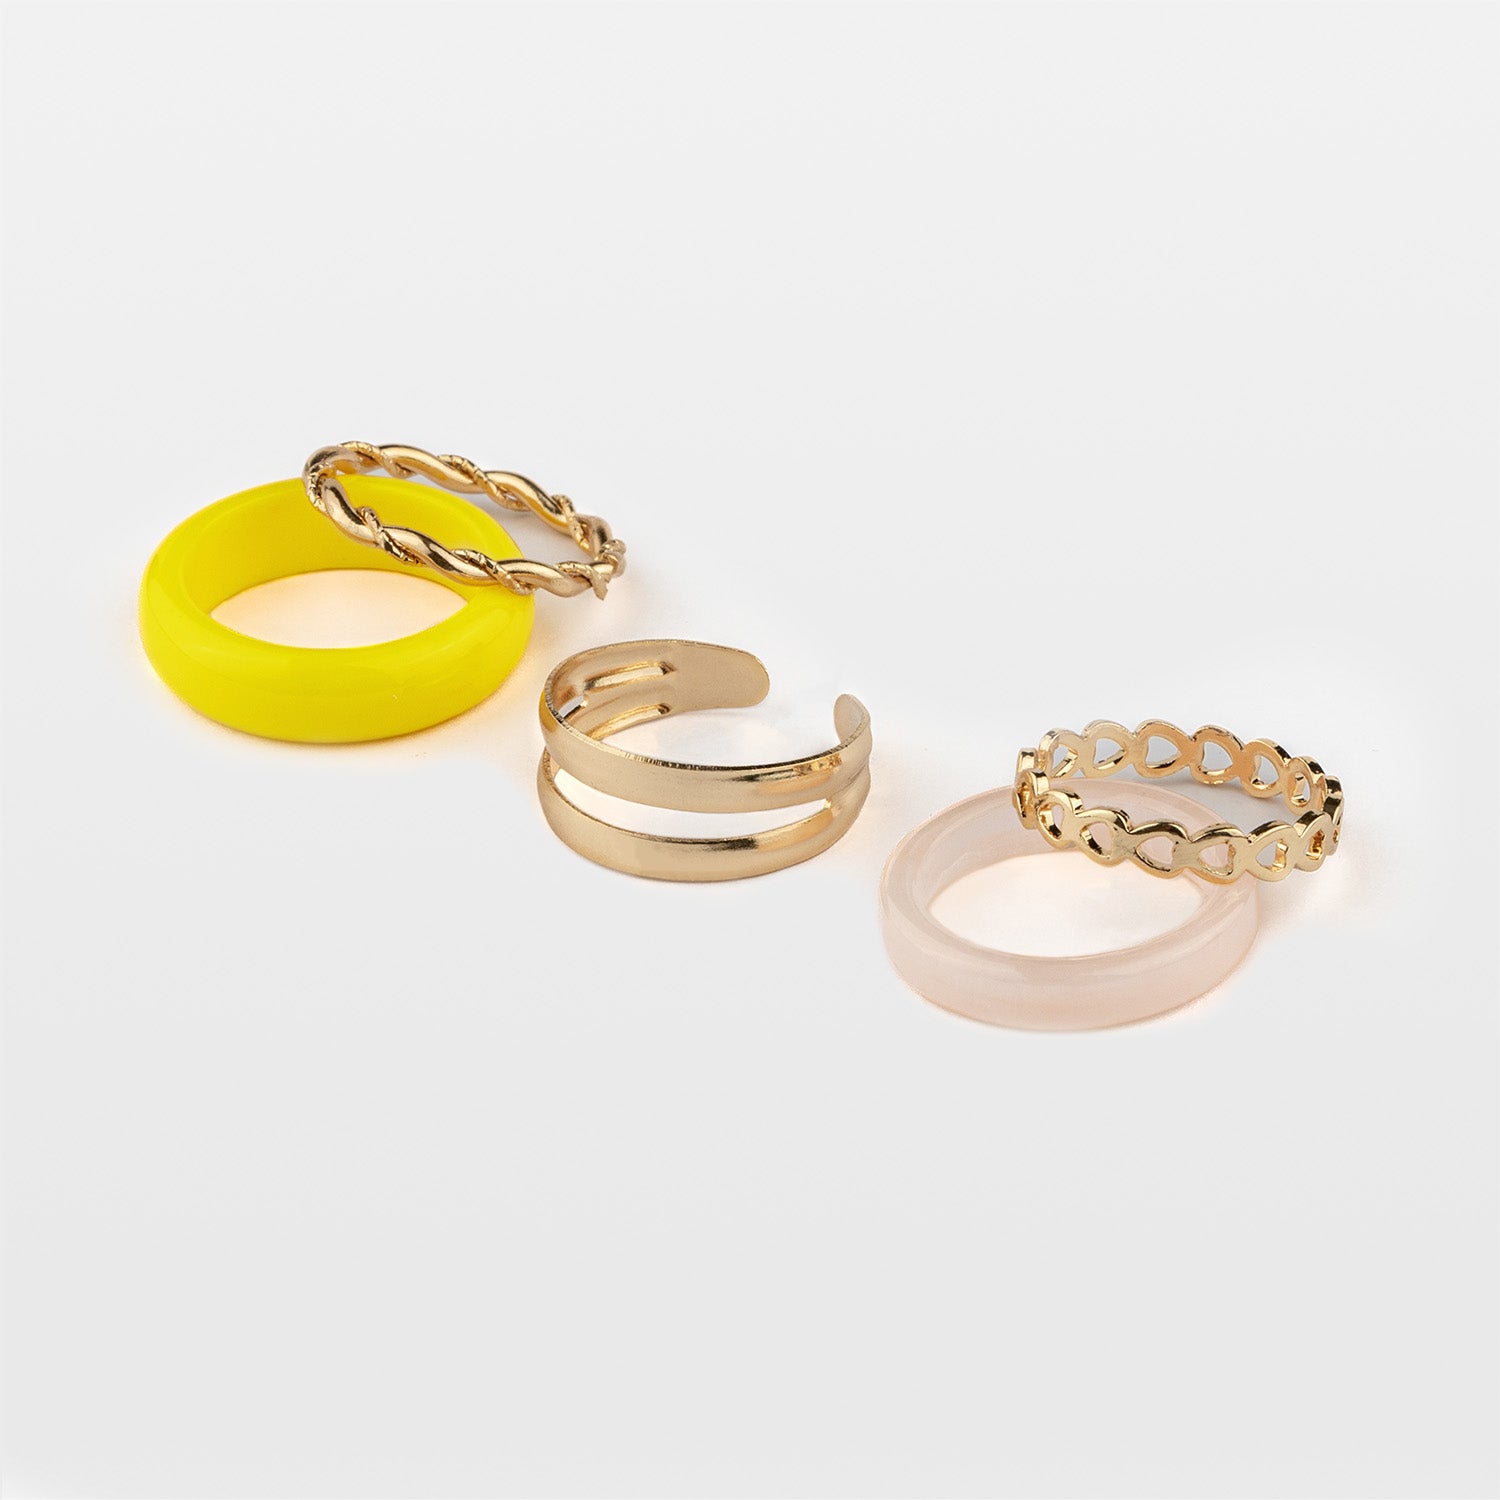 W Premium Jewellery Enough Yellow Stackable Rings Set (Pack of 5)